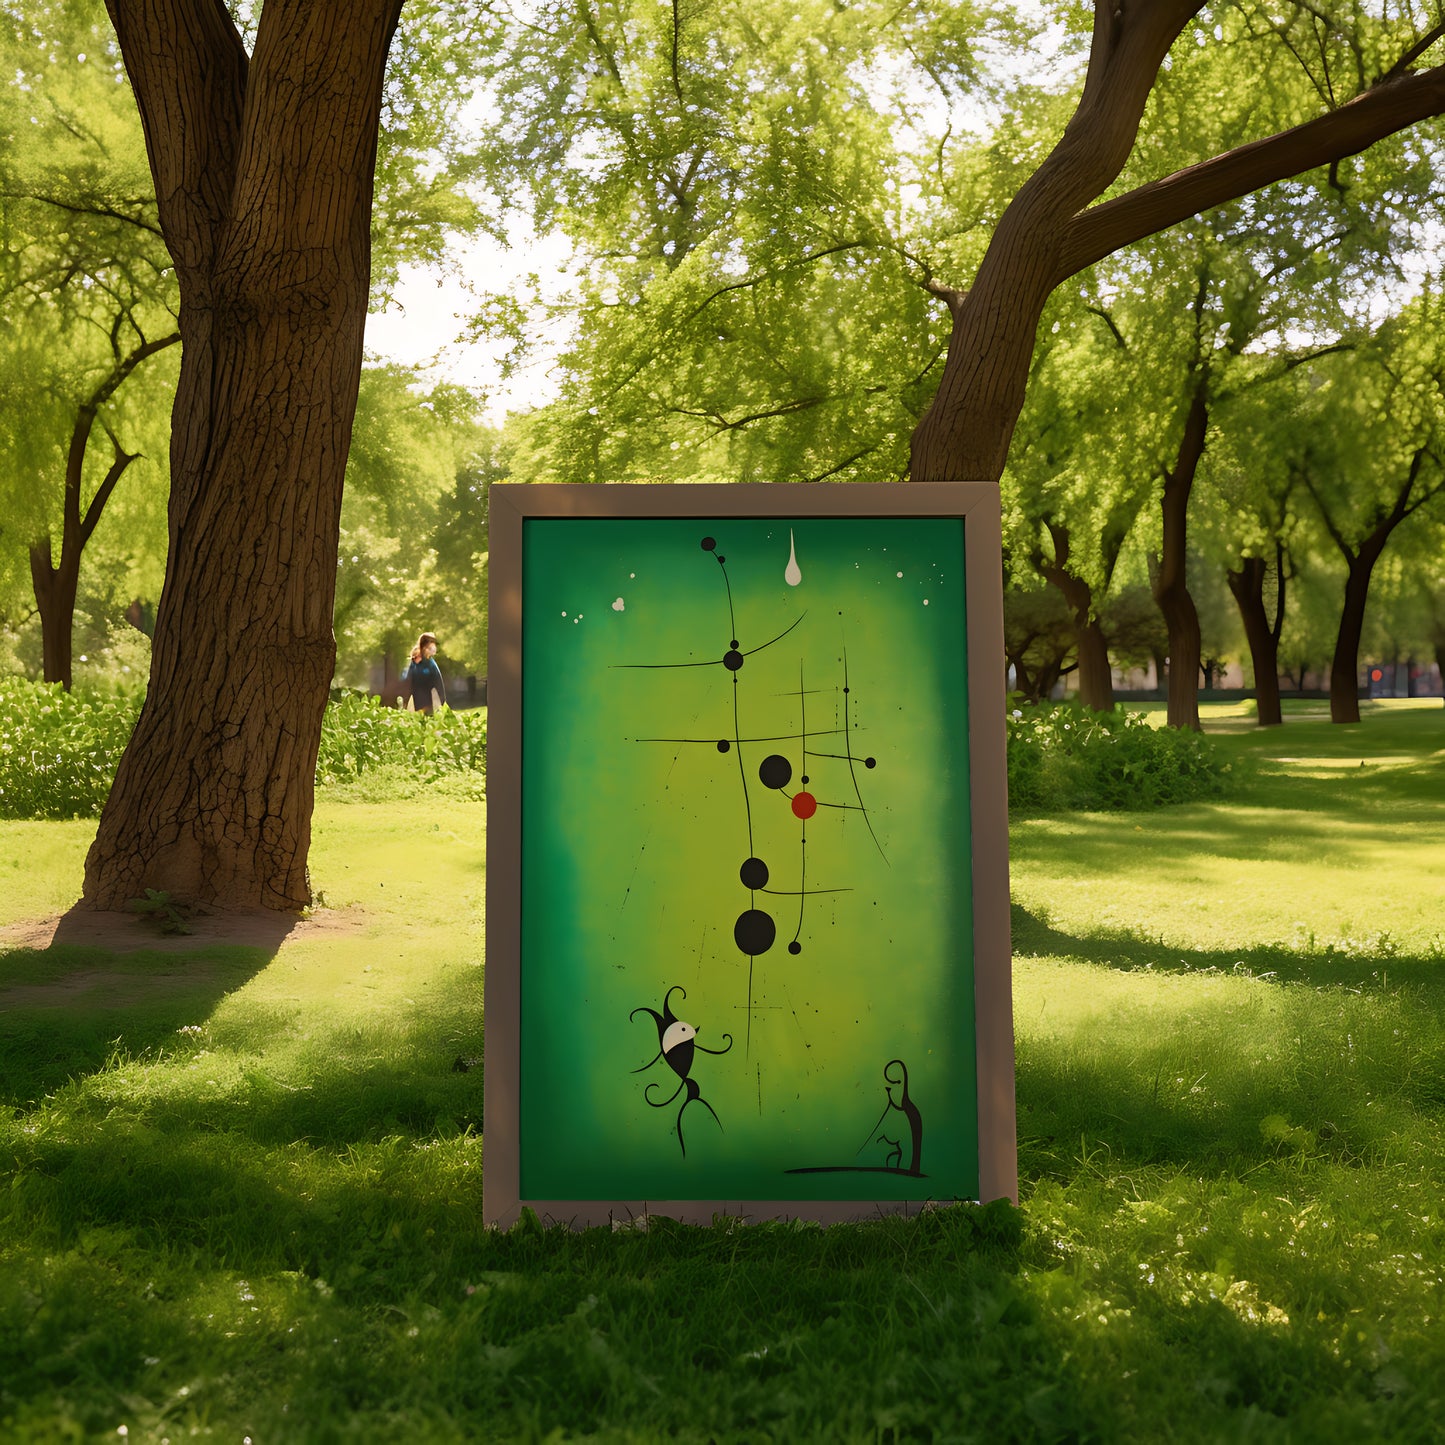 A modern art painting on an easel in a lush green park setting.